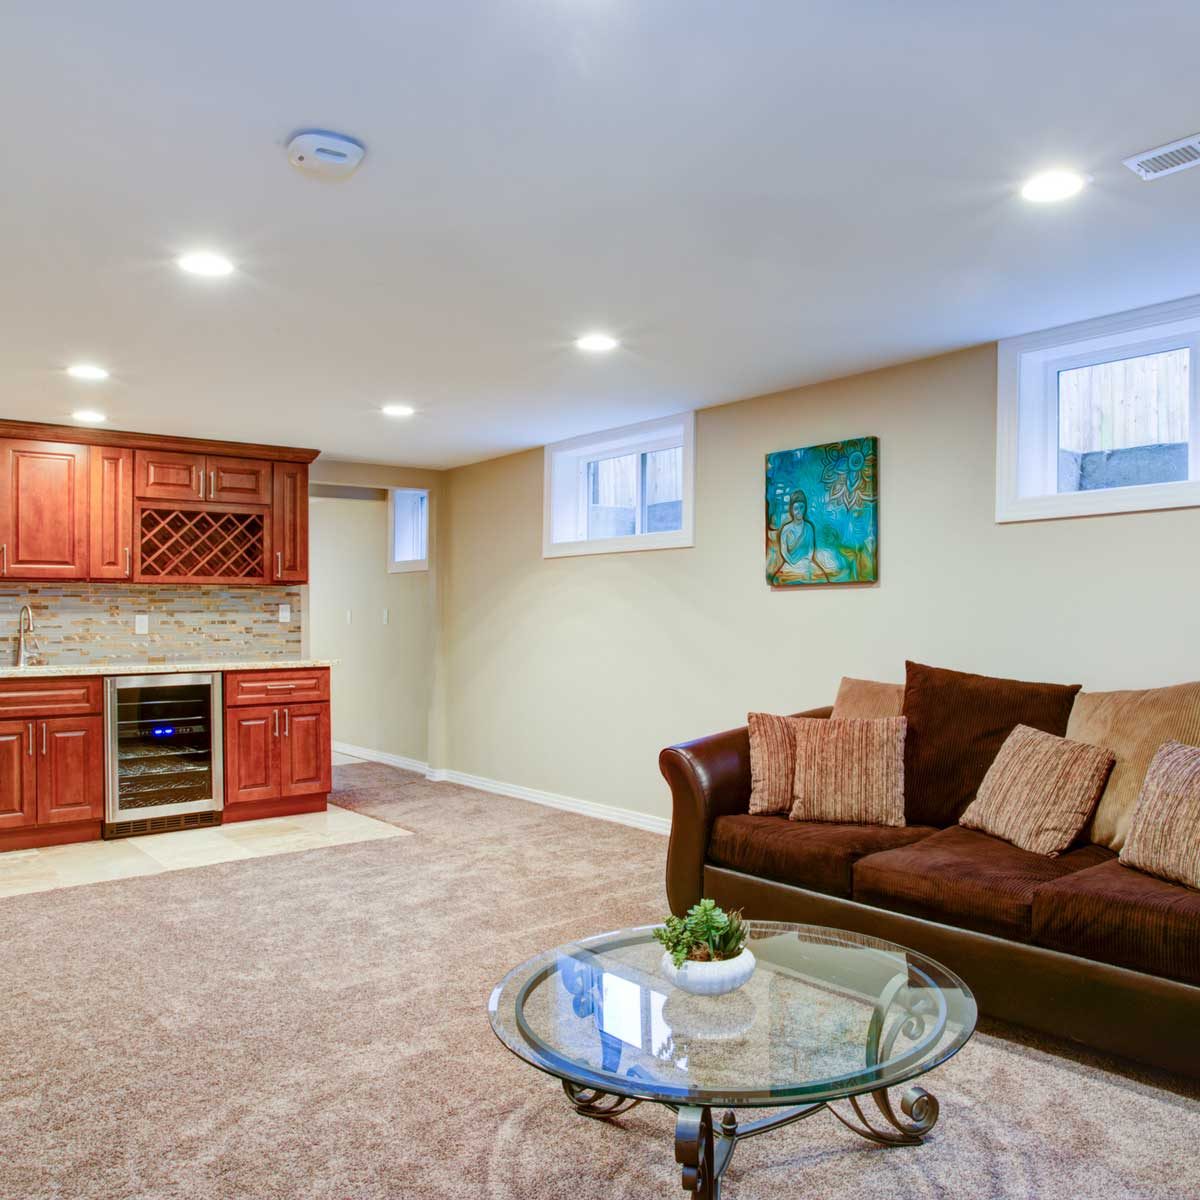 Best Types of Flooring for Your Basement | The Family Handyman